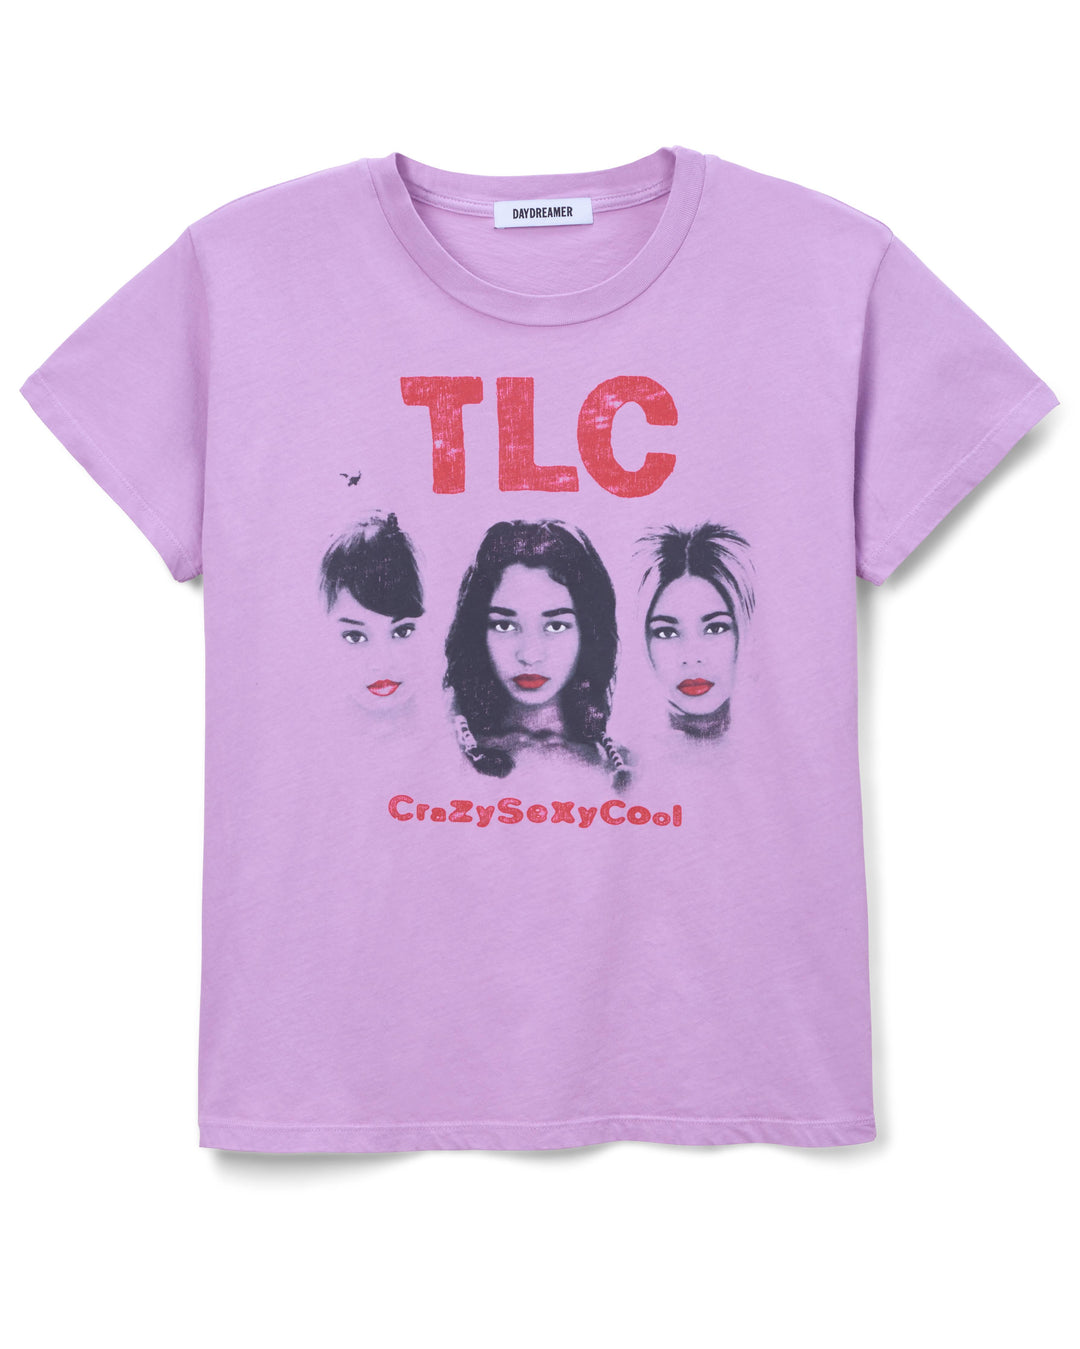 TLC CRAZY SEXY COOL SOLO TEE - VIOLET ROSE - Kingfisher Road - Online Boutique